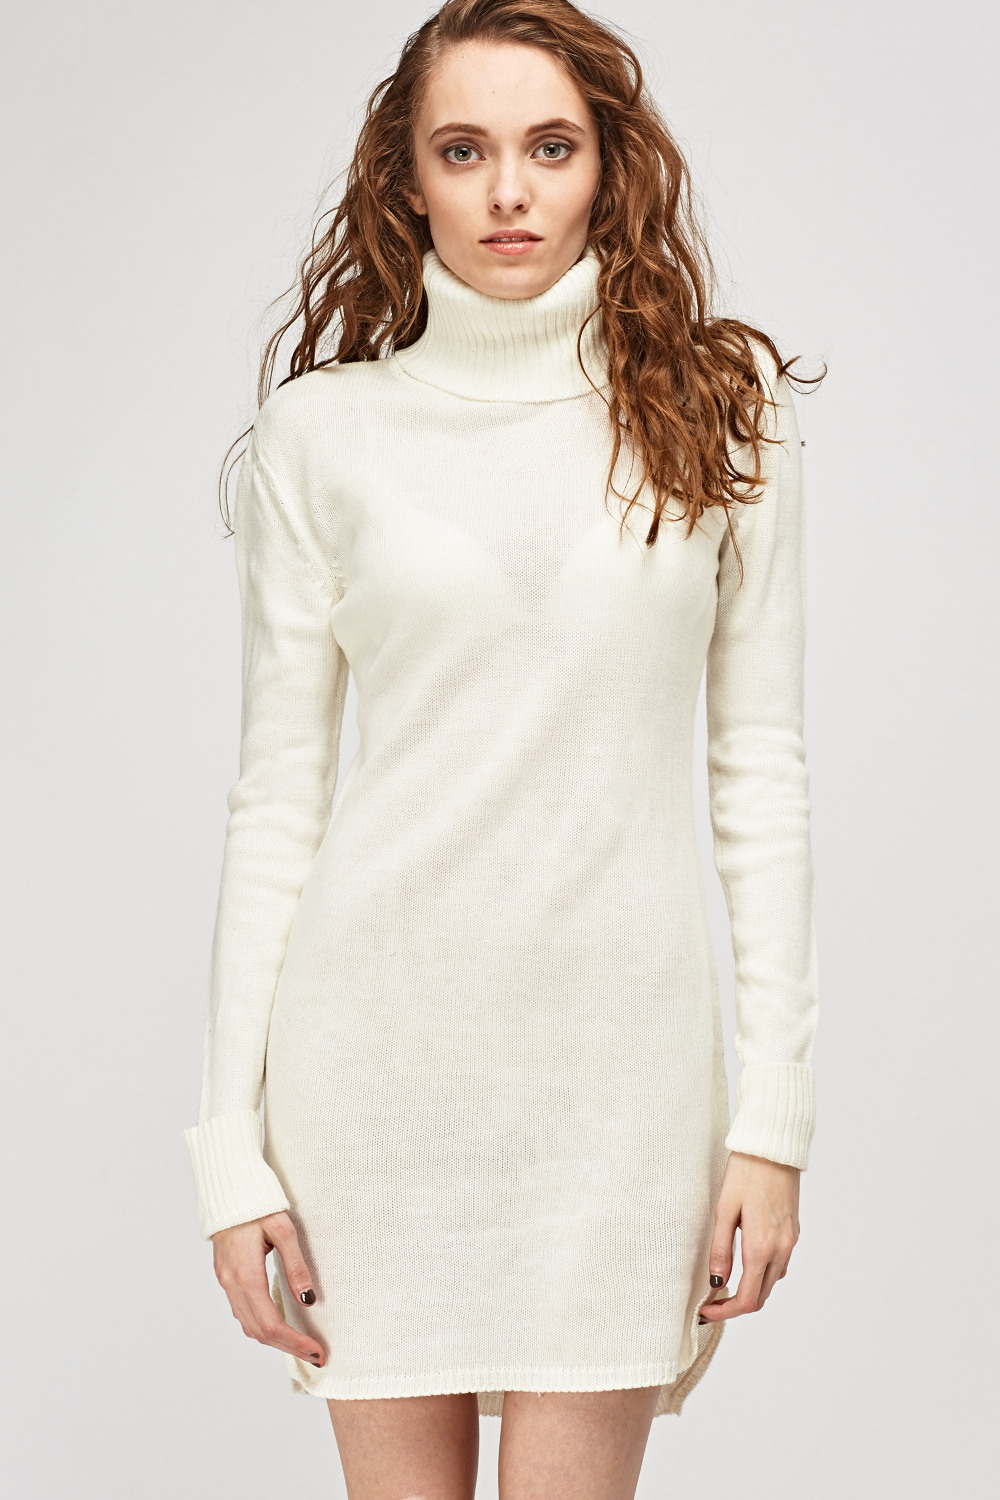 Turtle Neck Knitted Jumper Dress - Just $7